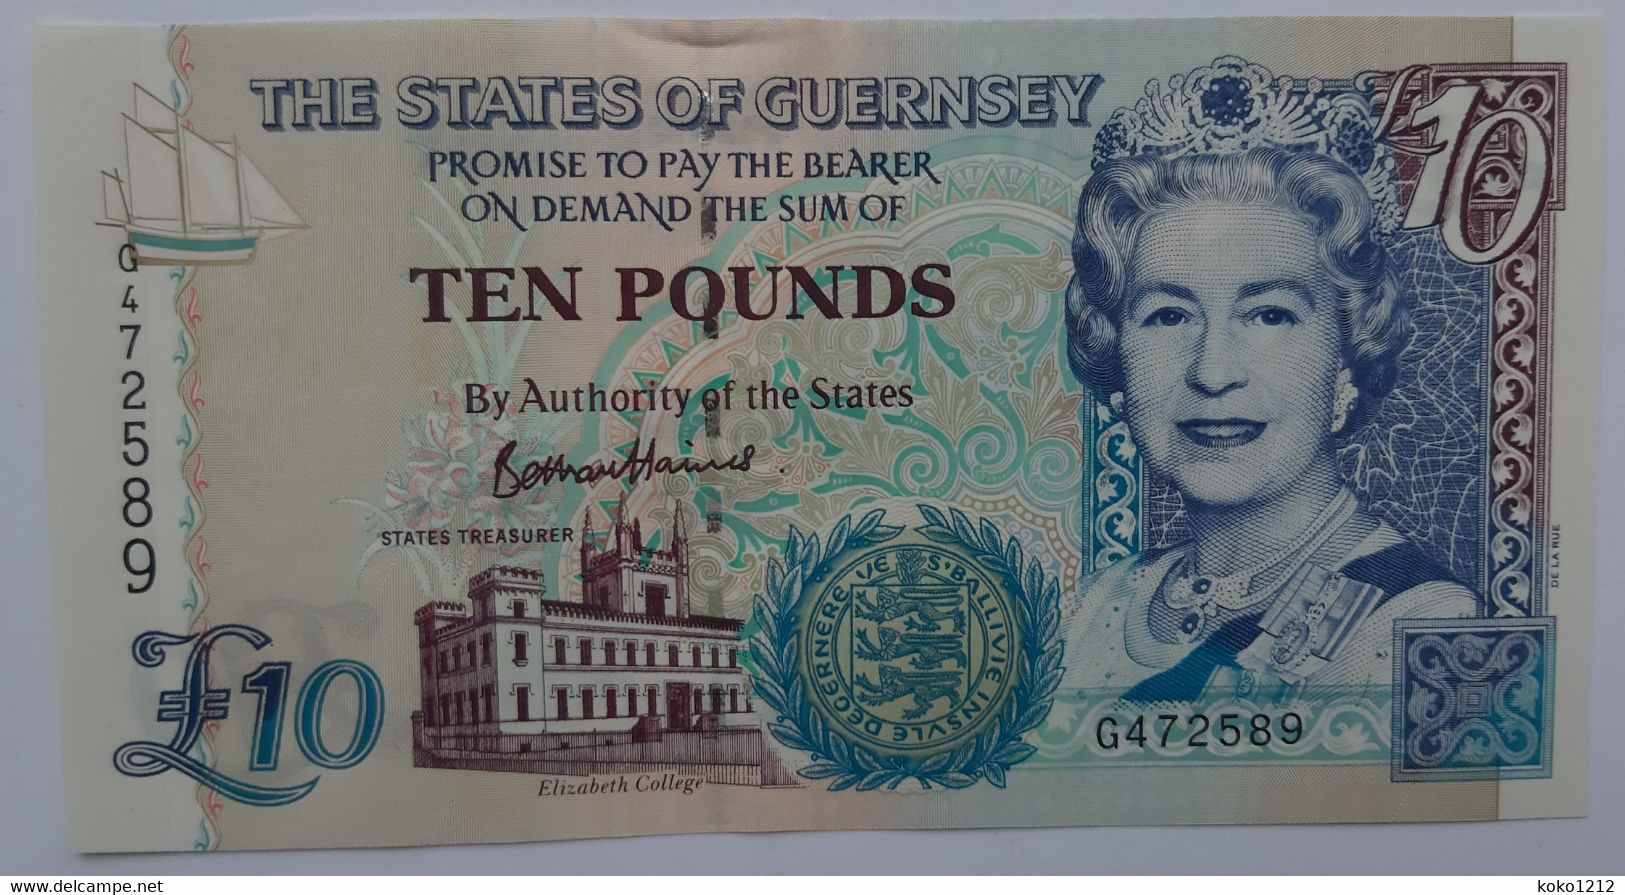 Guernsey 10 Pounds N.D. P57a UNC - Guernesey